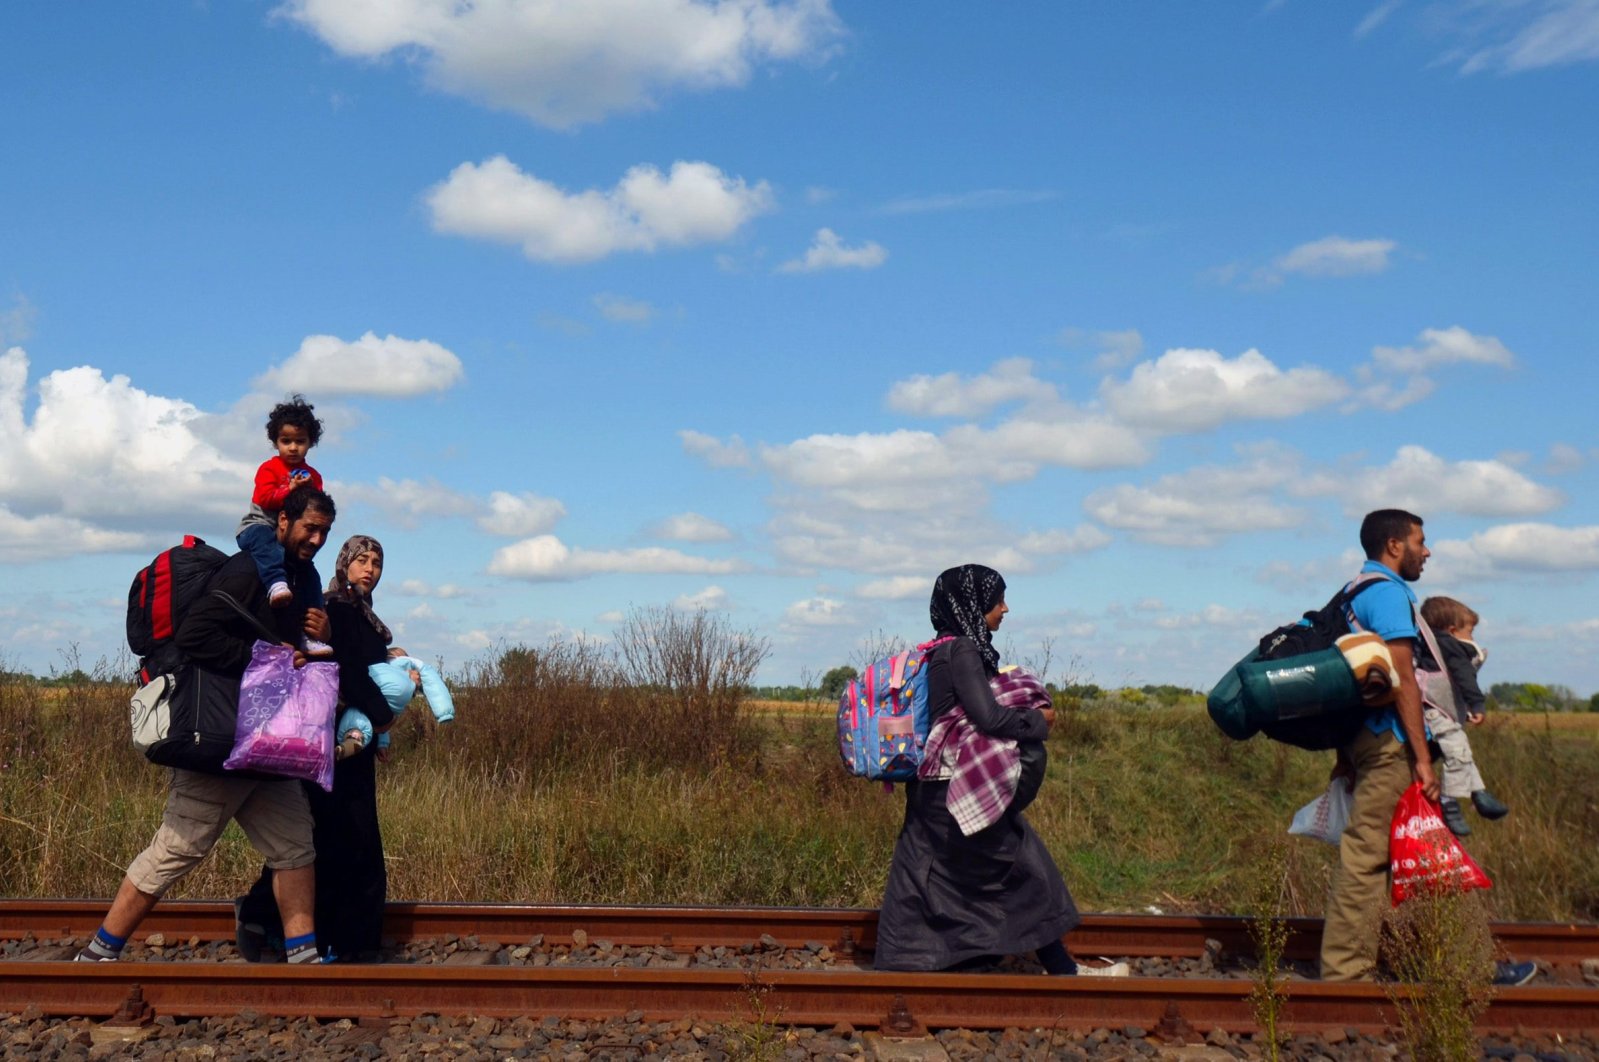 Migrant families walk on the railway track at the Hungarian-Serbian border near the village of Roszke, Hungary, Sept. 6, 2015. (AFP Photo)